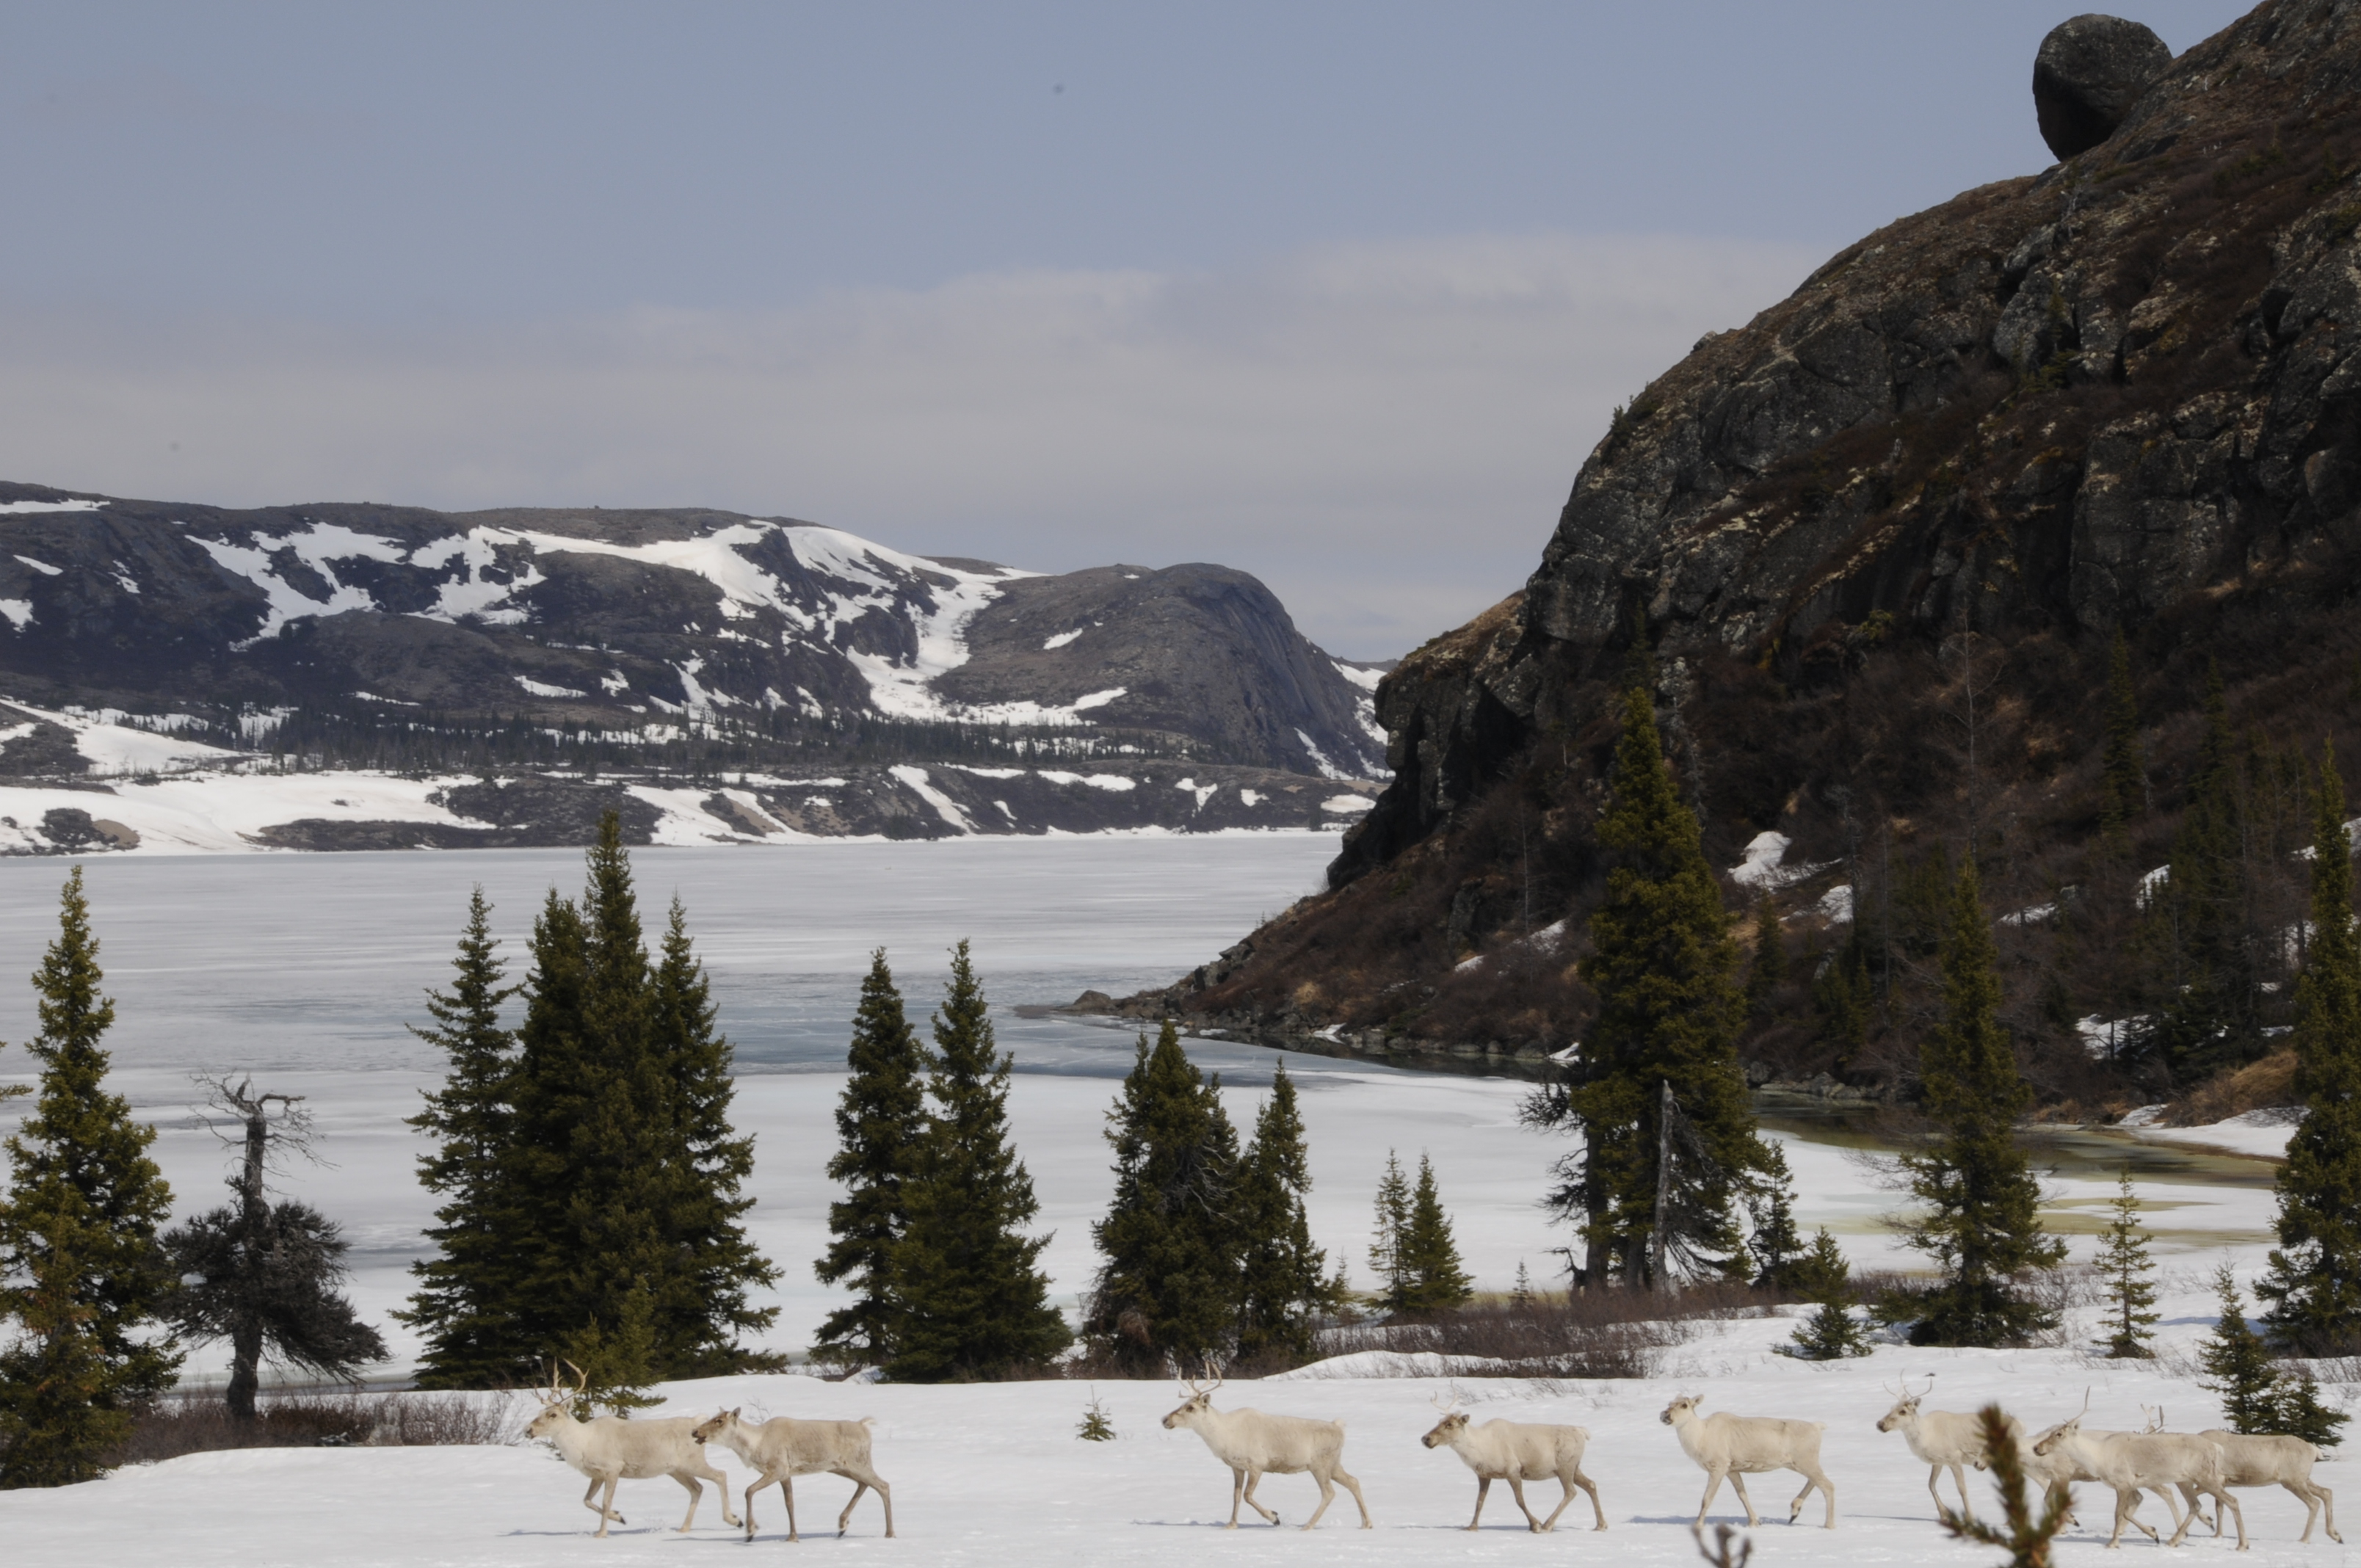 White caribou seen walking across a wintery scene with mountains and evergreen trees in the background